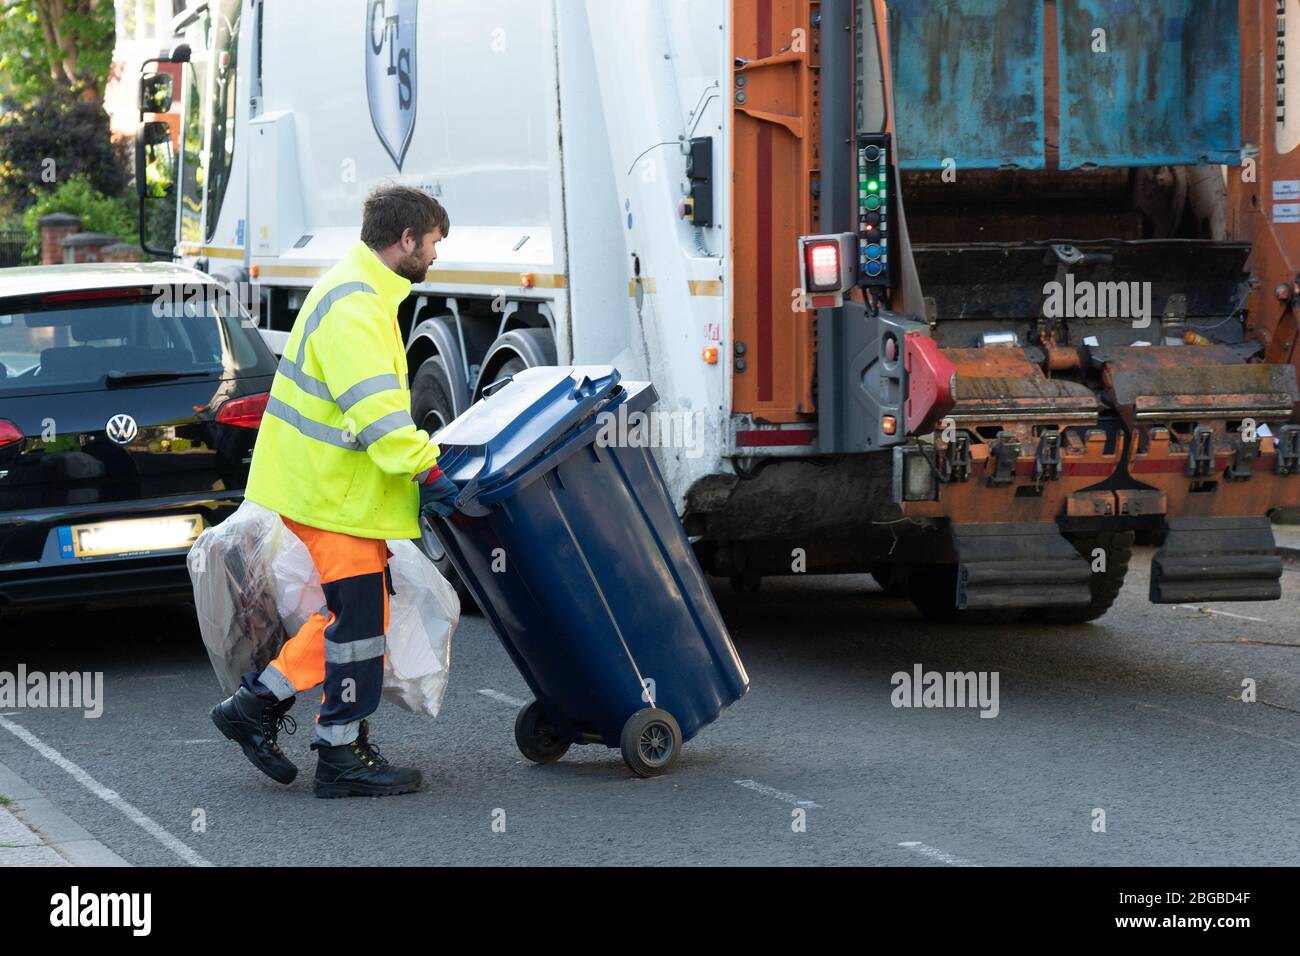 London, UK. Tuesday, 21 April, 2020. Refuse collectors working in a street in Ealing. Key workers have been praised for keeping services going during the coronavirus pandemic crisis. Photo date: Tuesday, April 21, 2020. Photo: Richard Gray/Alamy Stock Photo